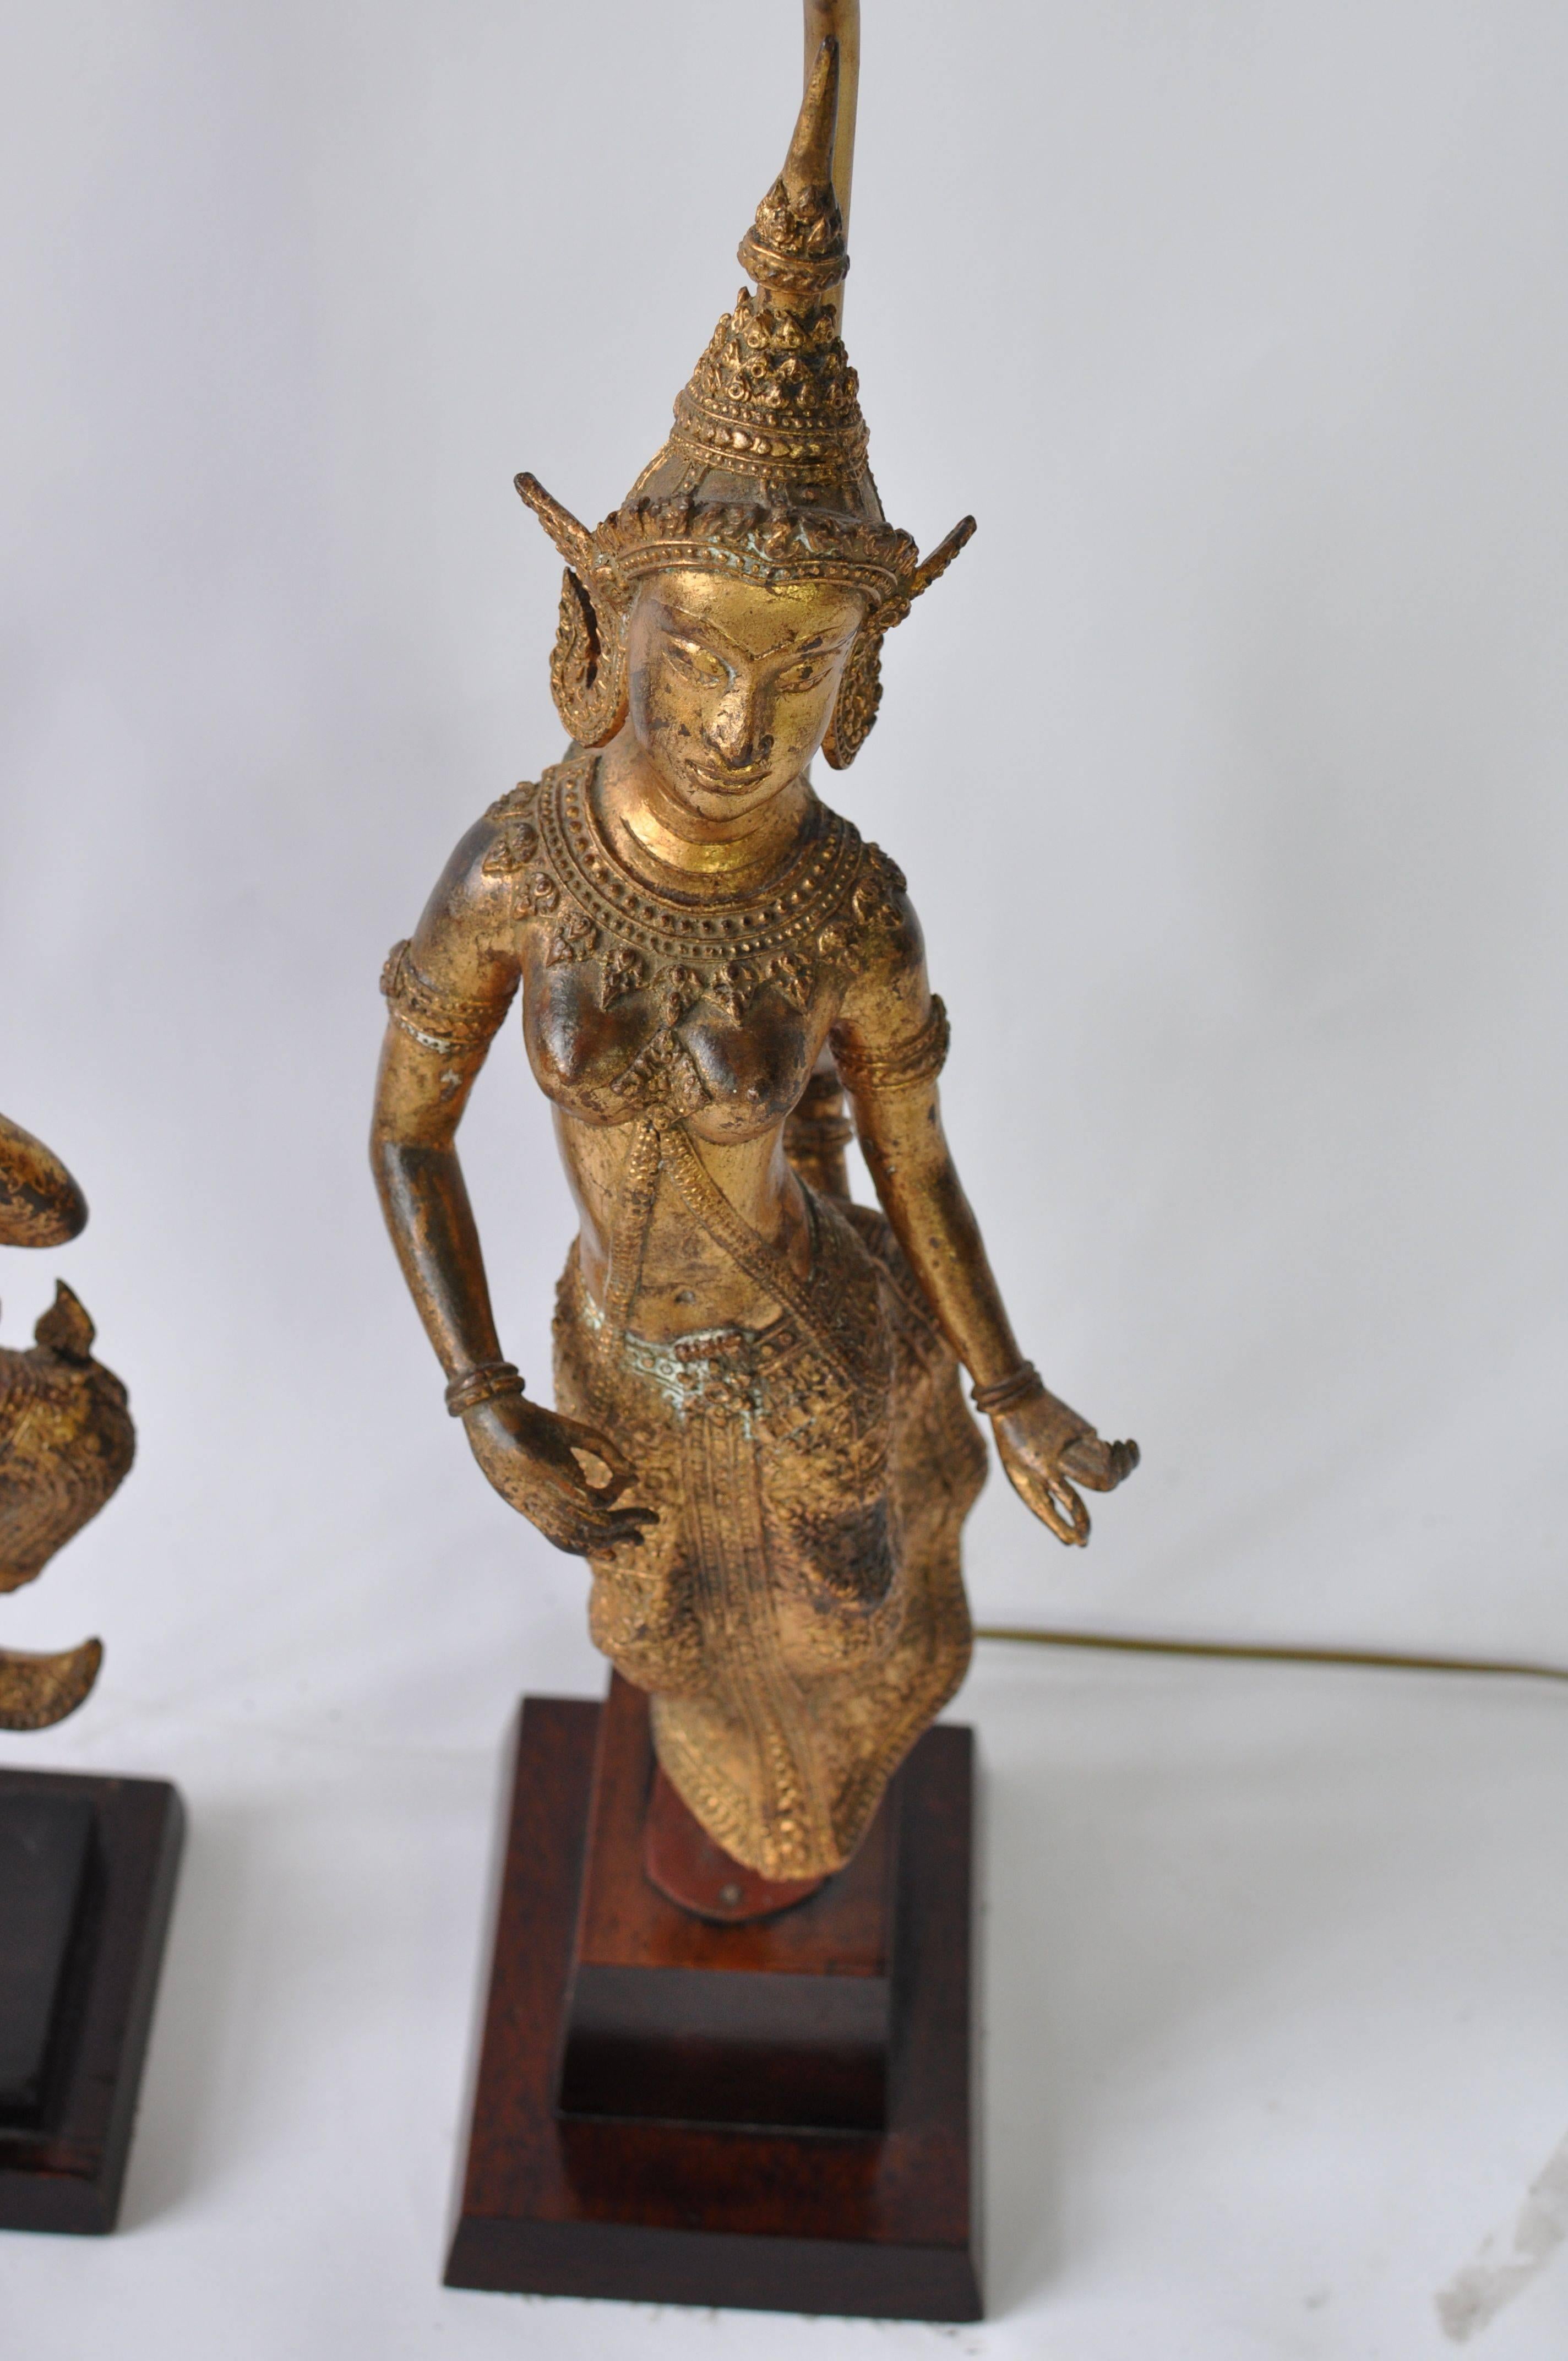 Collection of vintage Thai figure lamps. Gilt bronze over metal. Wood base. Priced as a collection or email for individual pricing.

Lamps measure from left to right.
35.5 tall X 6 W X 7.25 d.
23 tall X 6.75 wide X 6.25 deep.
33 tall X 12.5